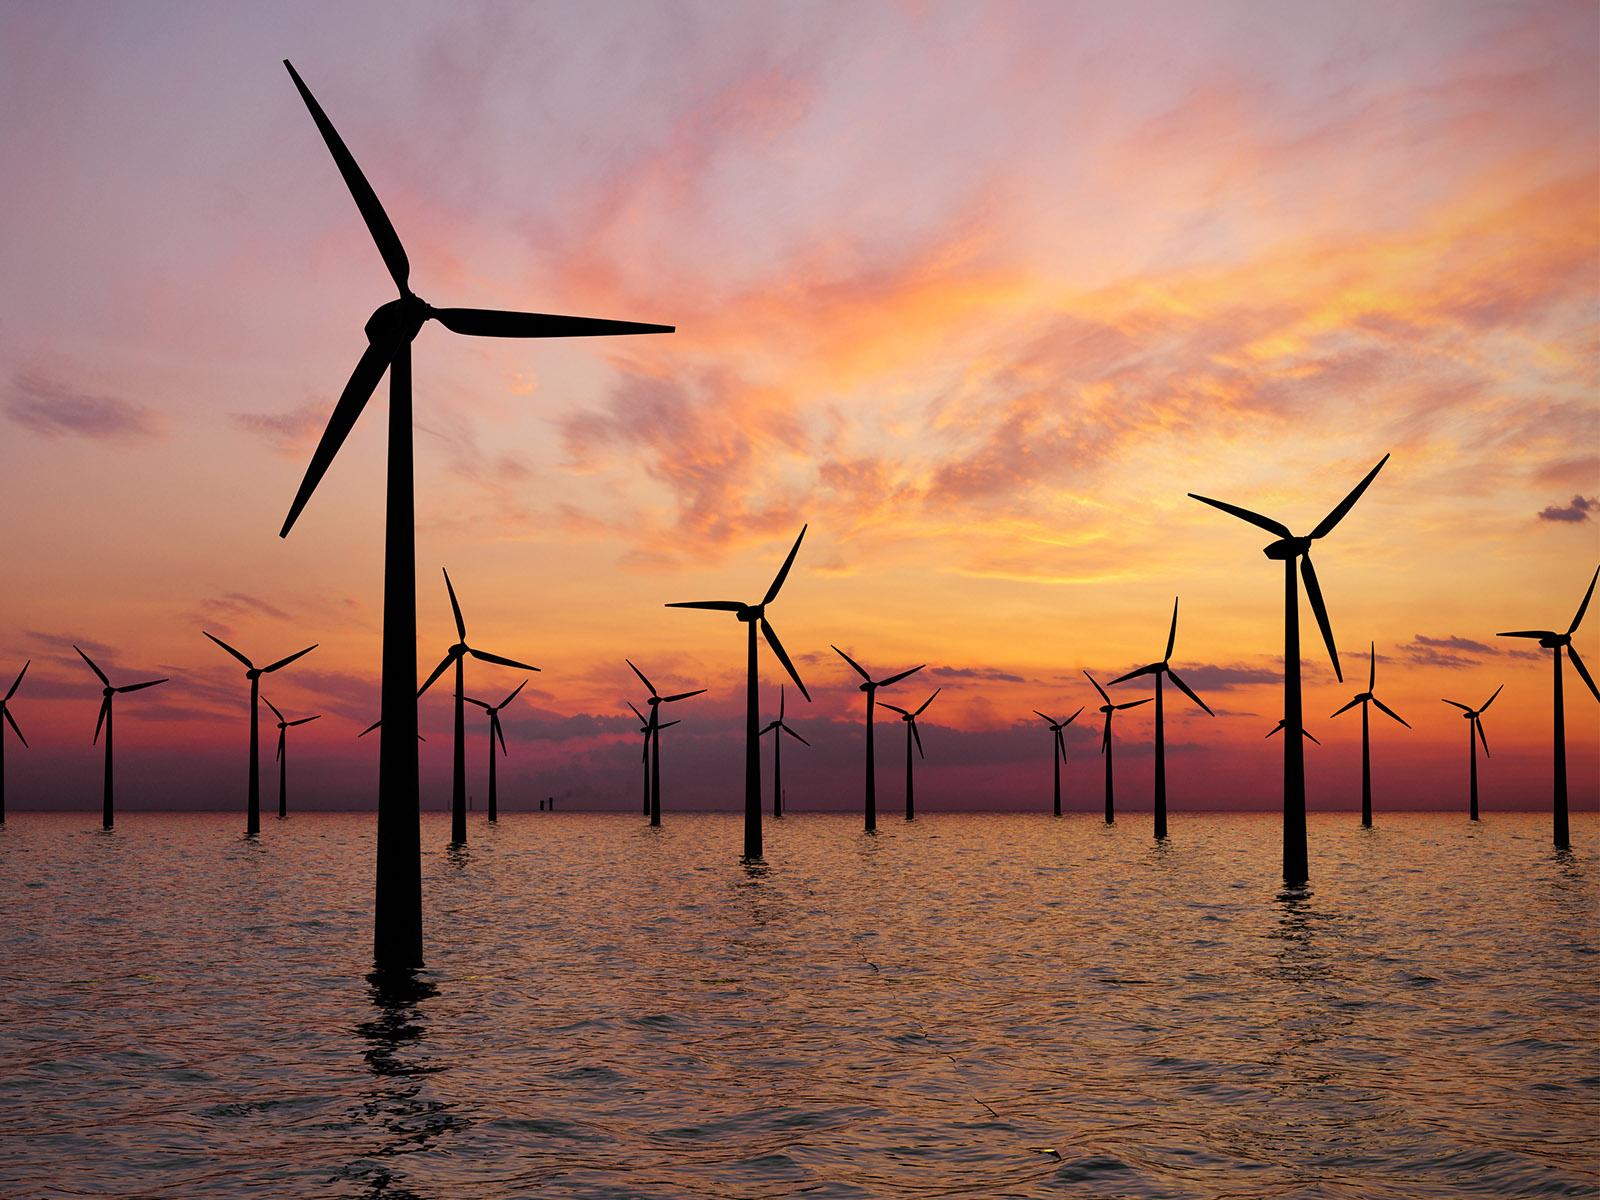 Turbines in water against sunset